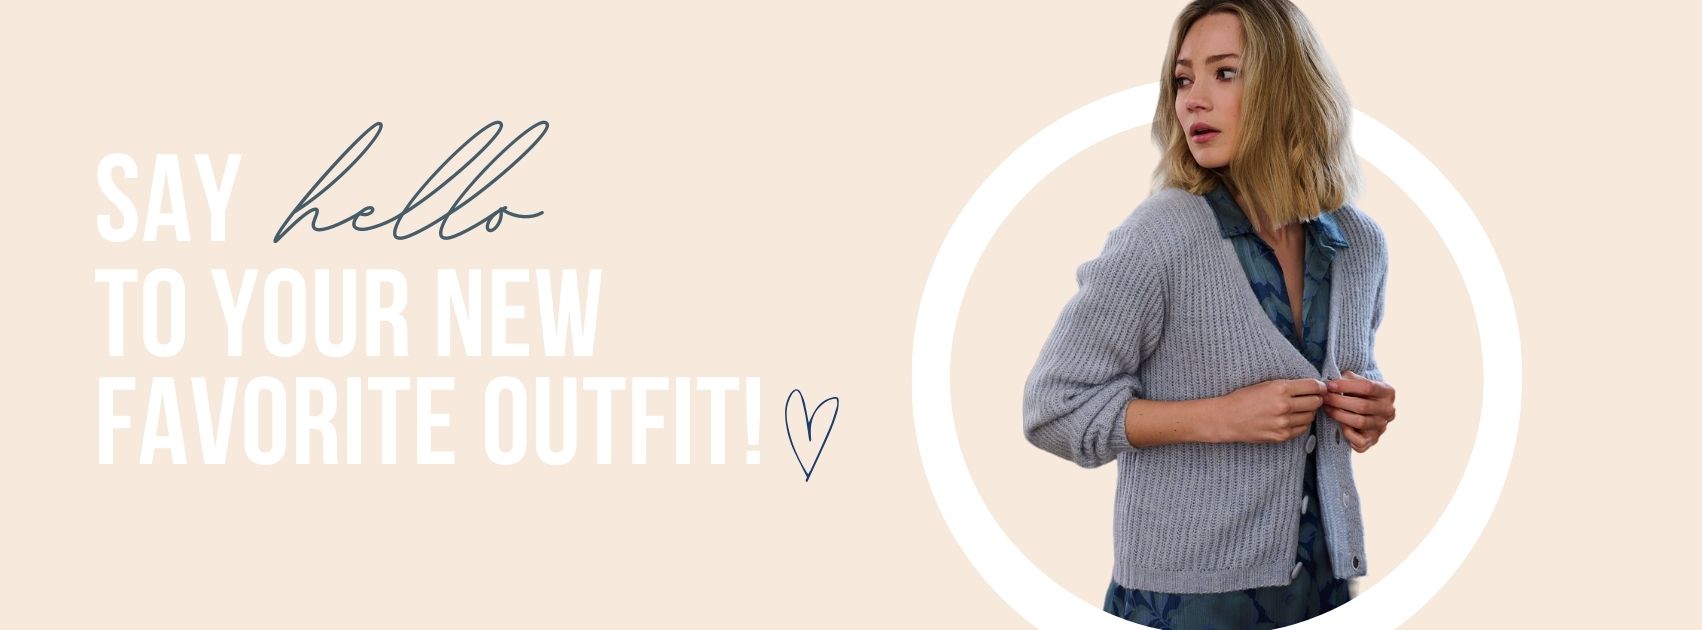 Banner: 'Say hello to your new favorite outfit!' Model wears Belgian women's fashion - Click to go to our webshop for stylish fashion.